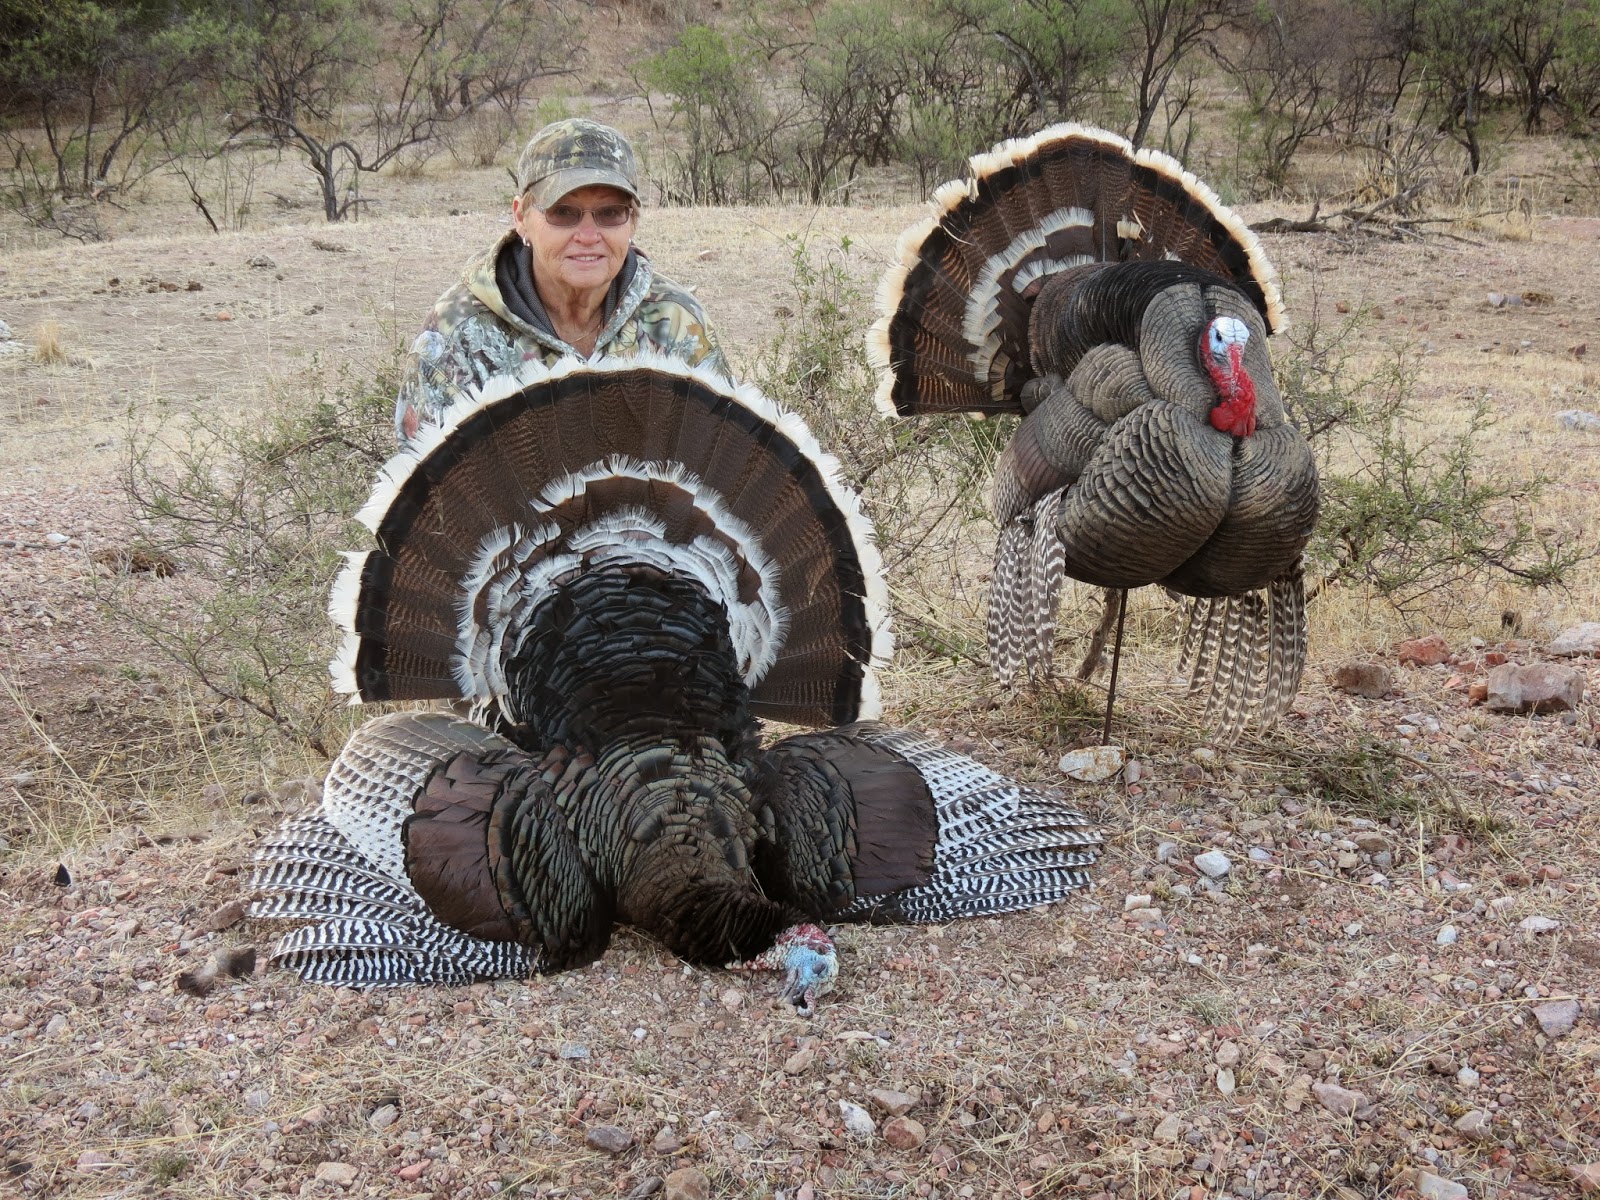 Hunting+Gould's+Turkeys+in+Mexico+with+Colburn+and+Scott+Outfitters+and+Jay+Scott.++Peggie+and+TJ+Joiner+1.JPG